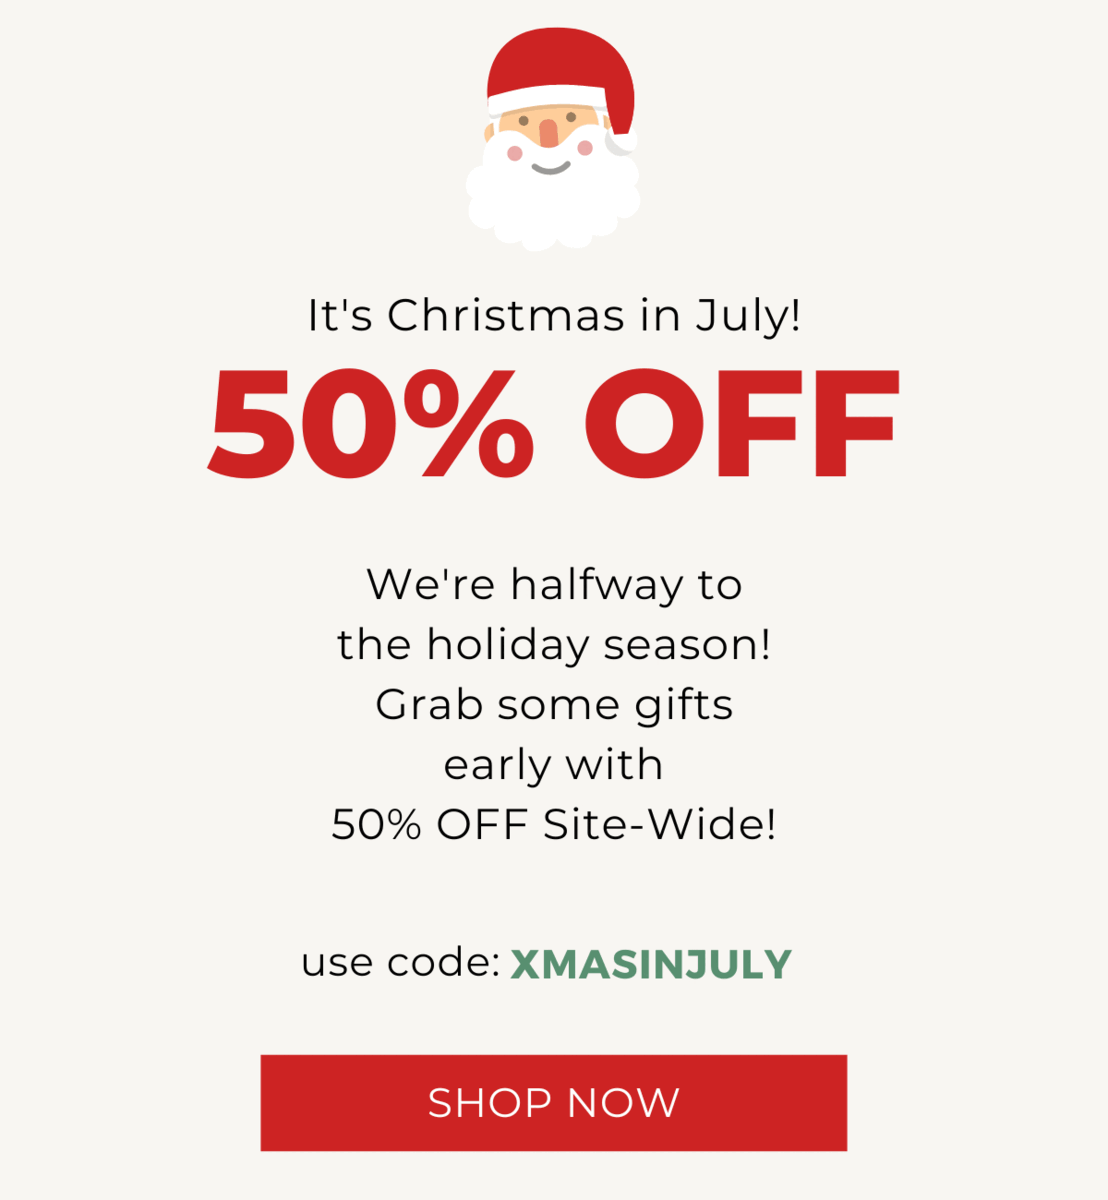 50% OFF Site-Wide for Christmas in July!